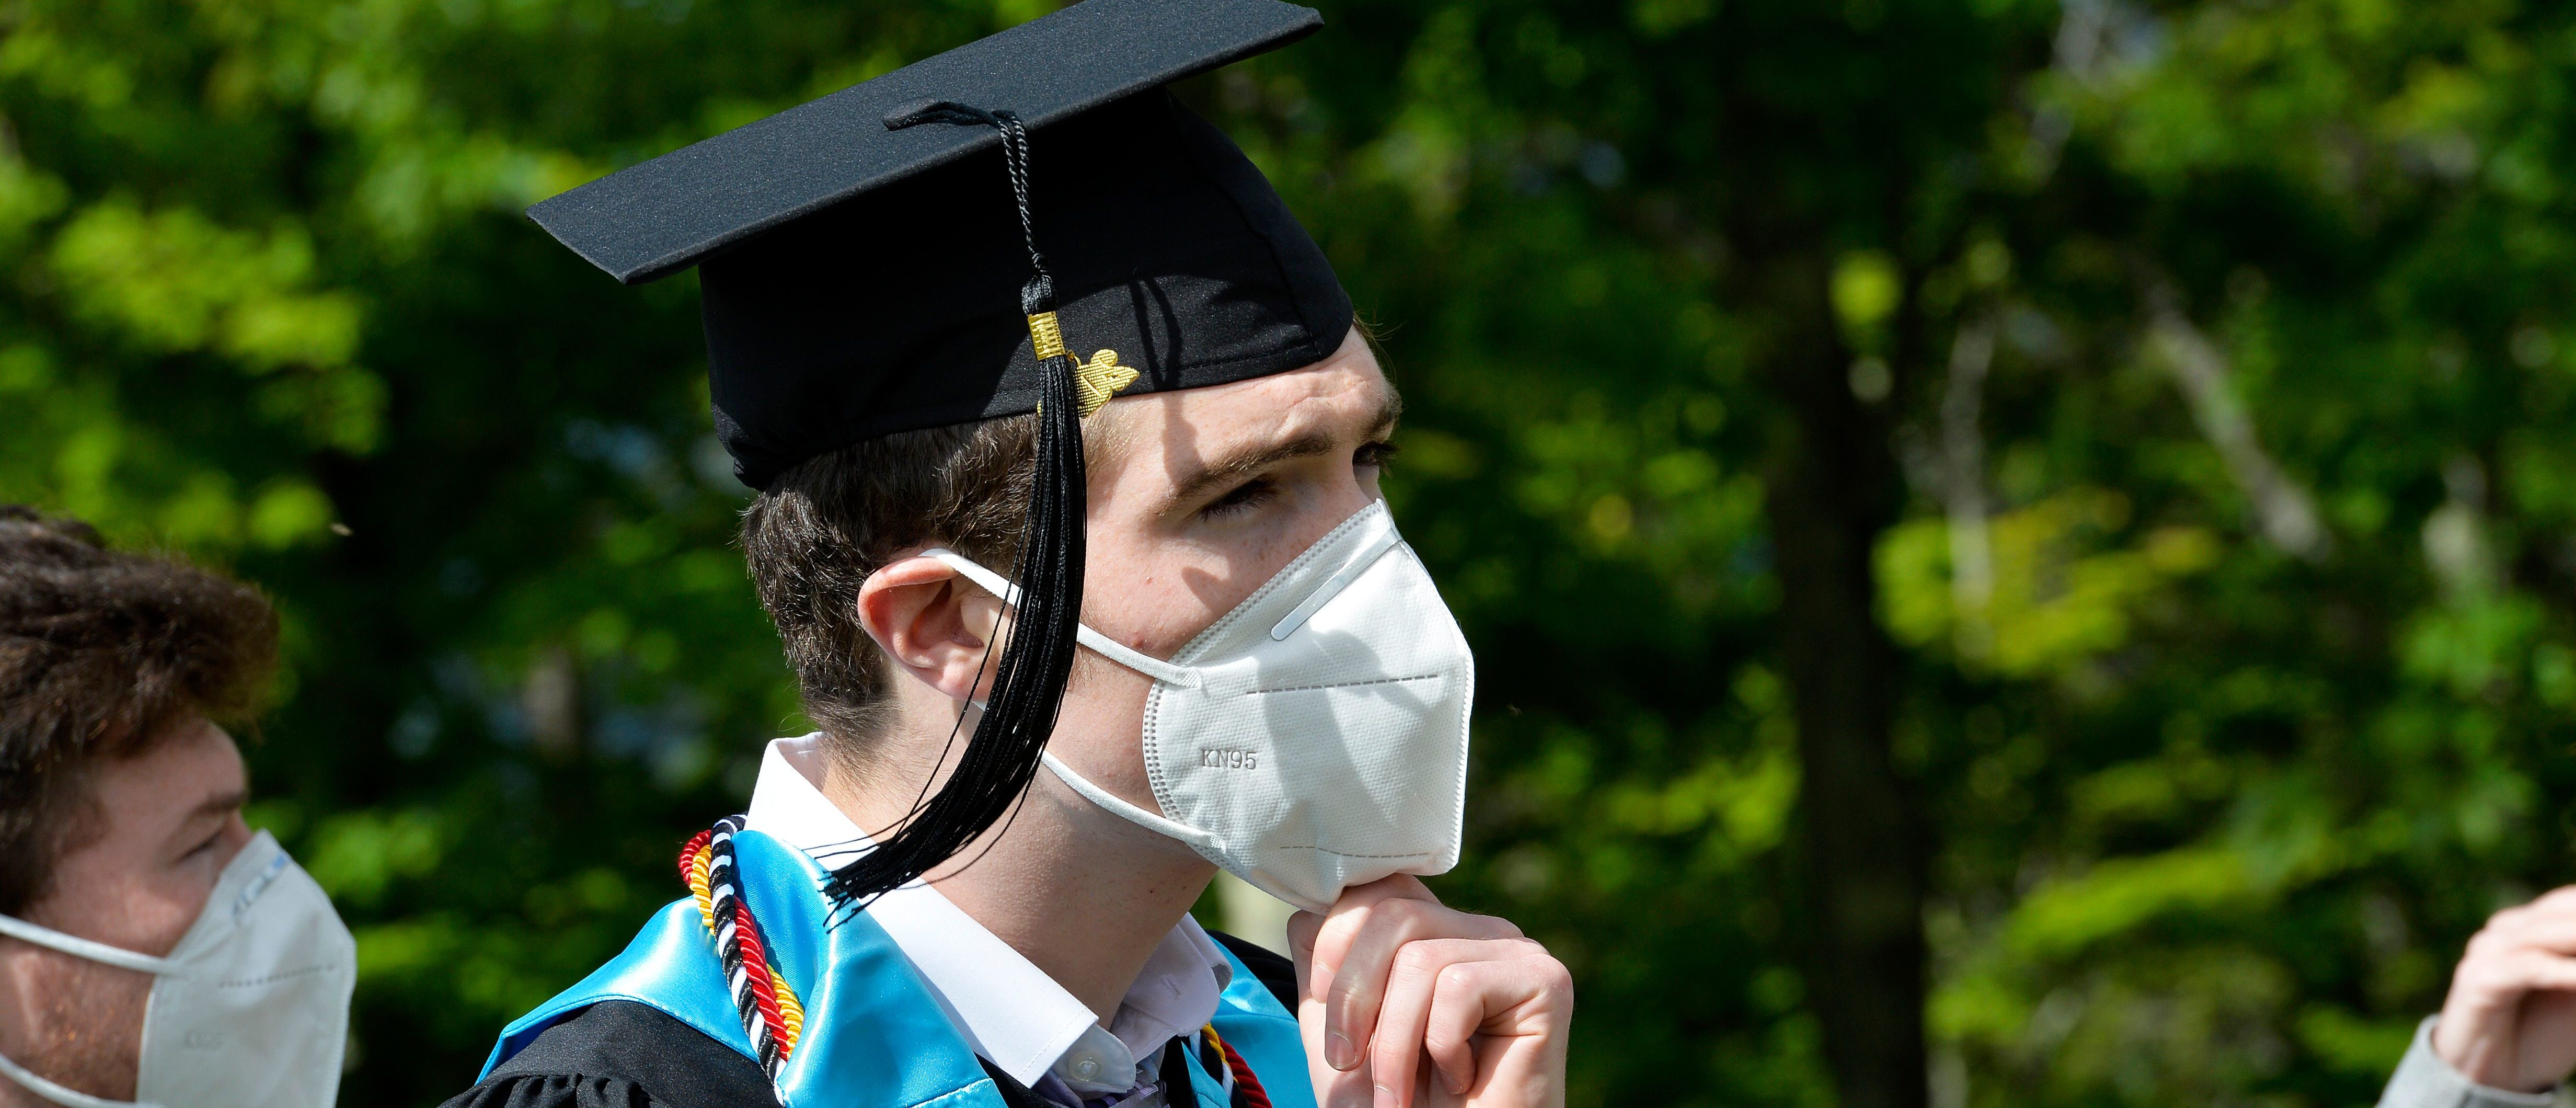 A student puts his mask back on after taking family photos during the Kenneth High School Class of 2020 Commencement Exercises at Cranmore Mountain in North Conway, New Hampshire on June 13, 2020. - The unique graduation was a way to follow health guidelines for Covid-19 and allow the students to have their graduation day. (Photo by Joseph Prezioso / AFP) (Photo by JOSEPH PREZIOSO/AFP via Getty Images)